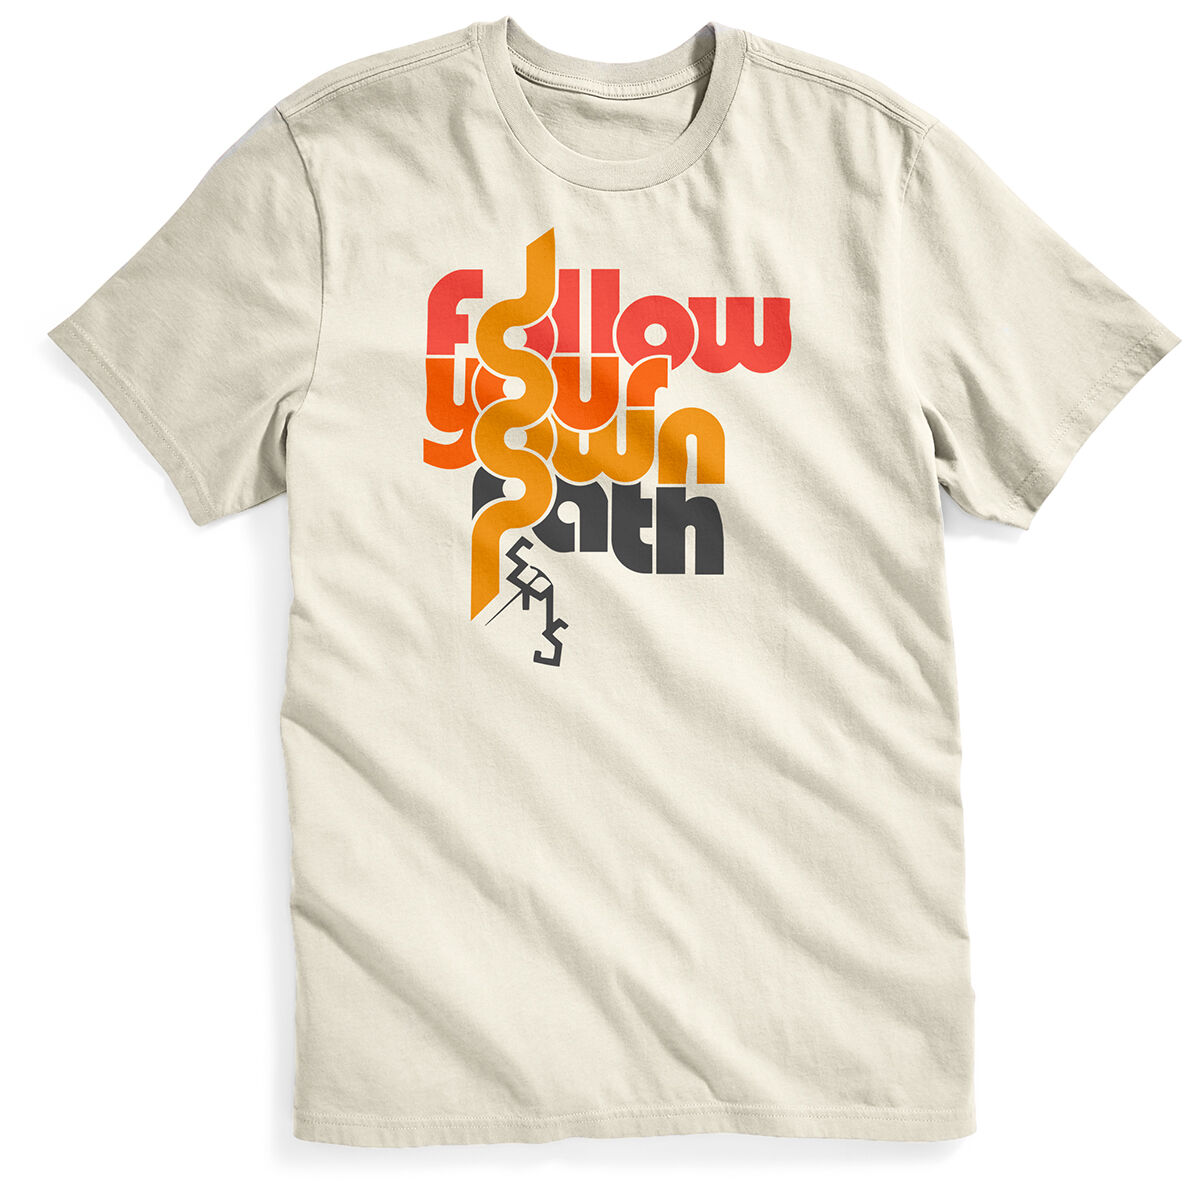 Ems Men's Follow Your Own Path Short-Sleeve Graphic Tee - White, M